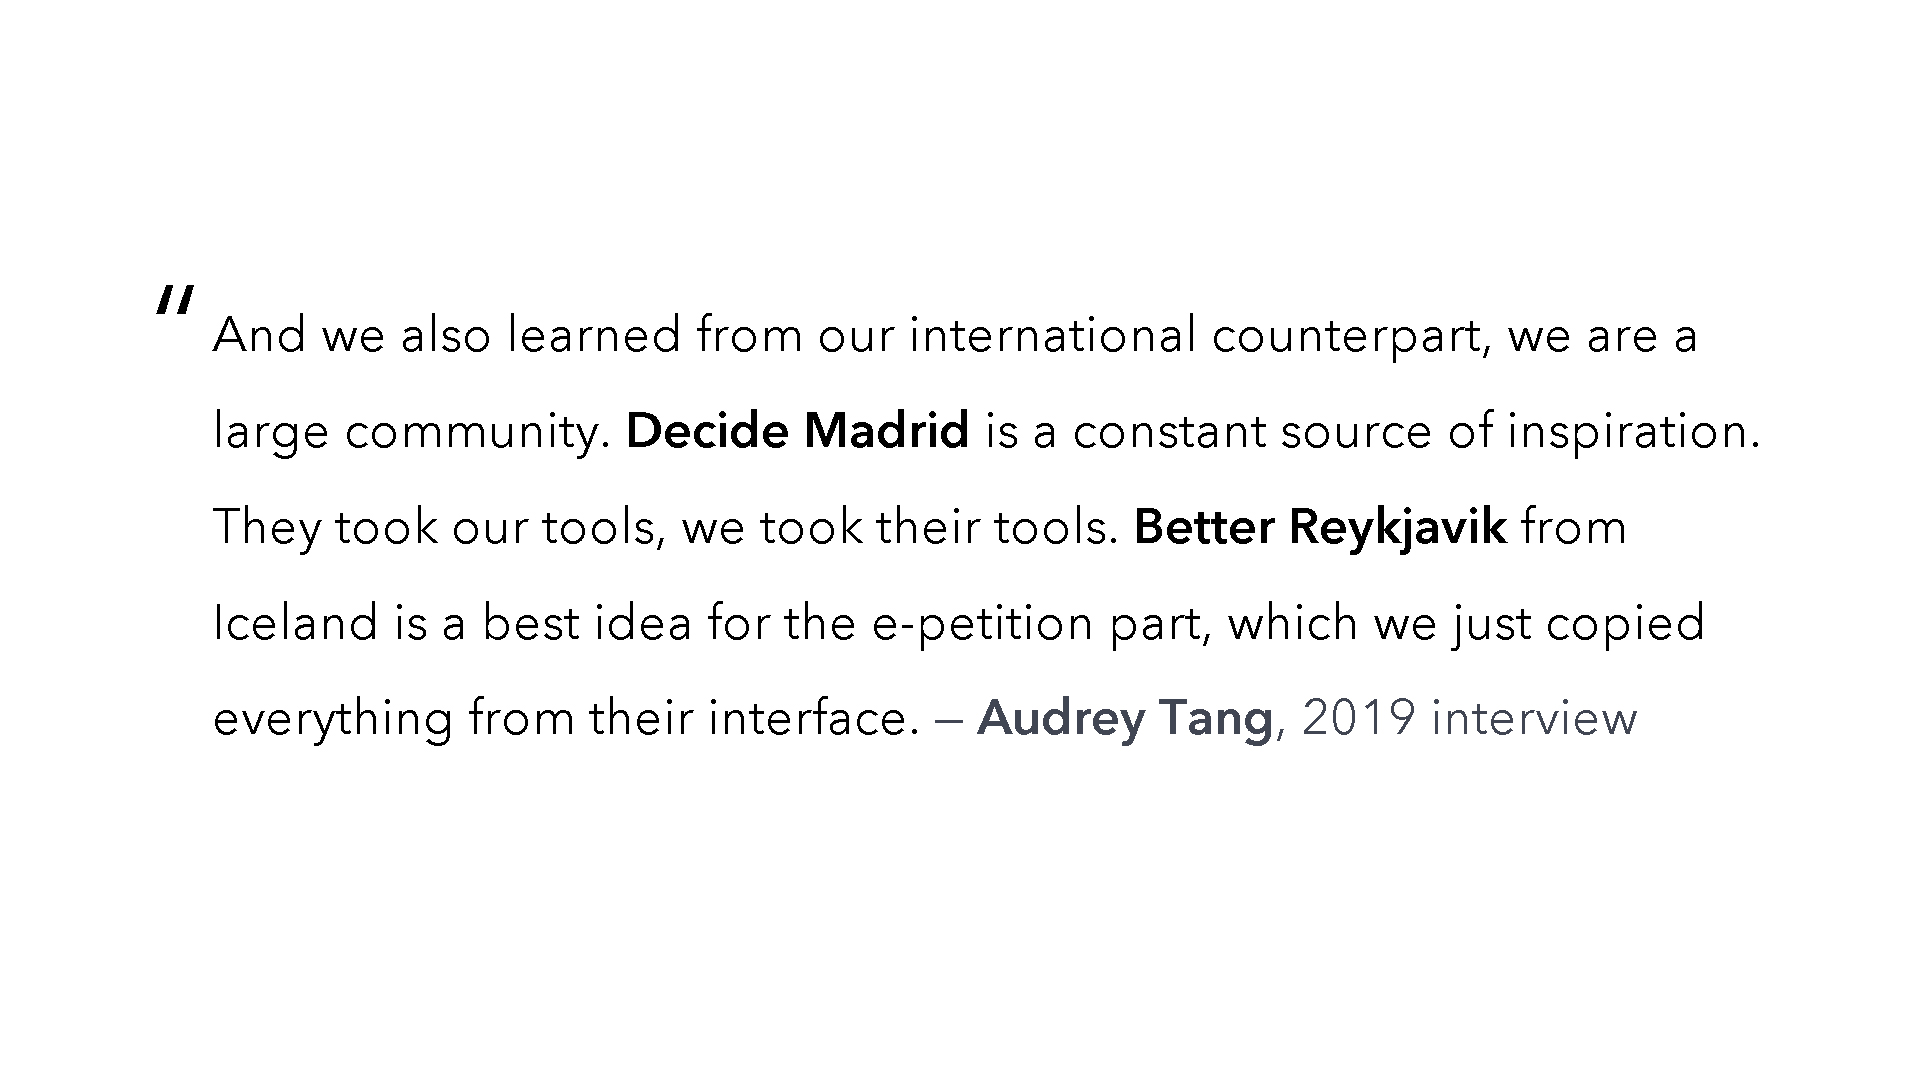 2019 quote from Audrey Tang